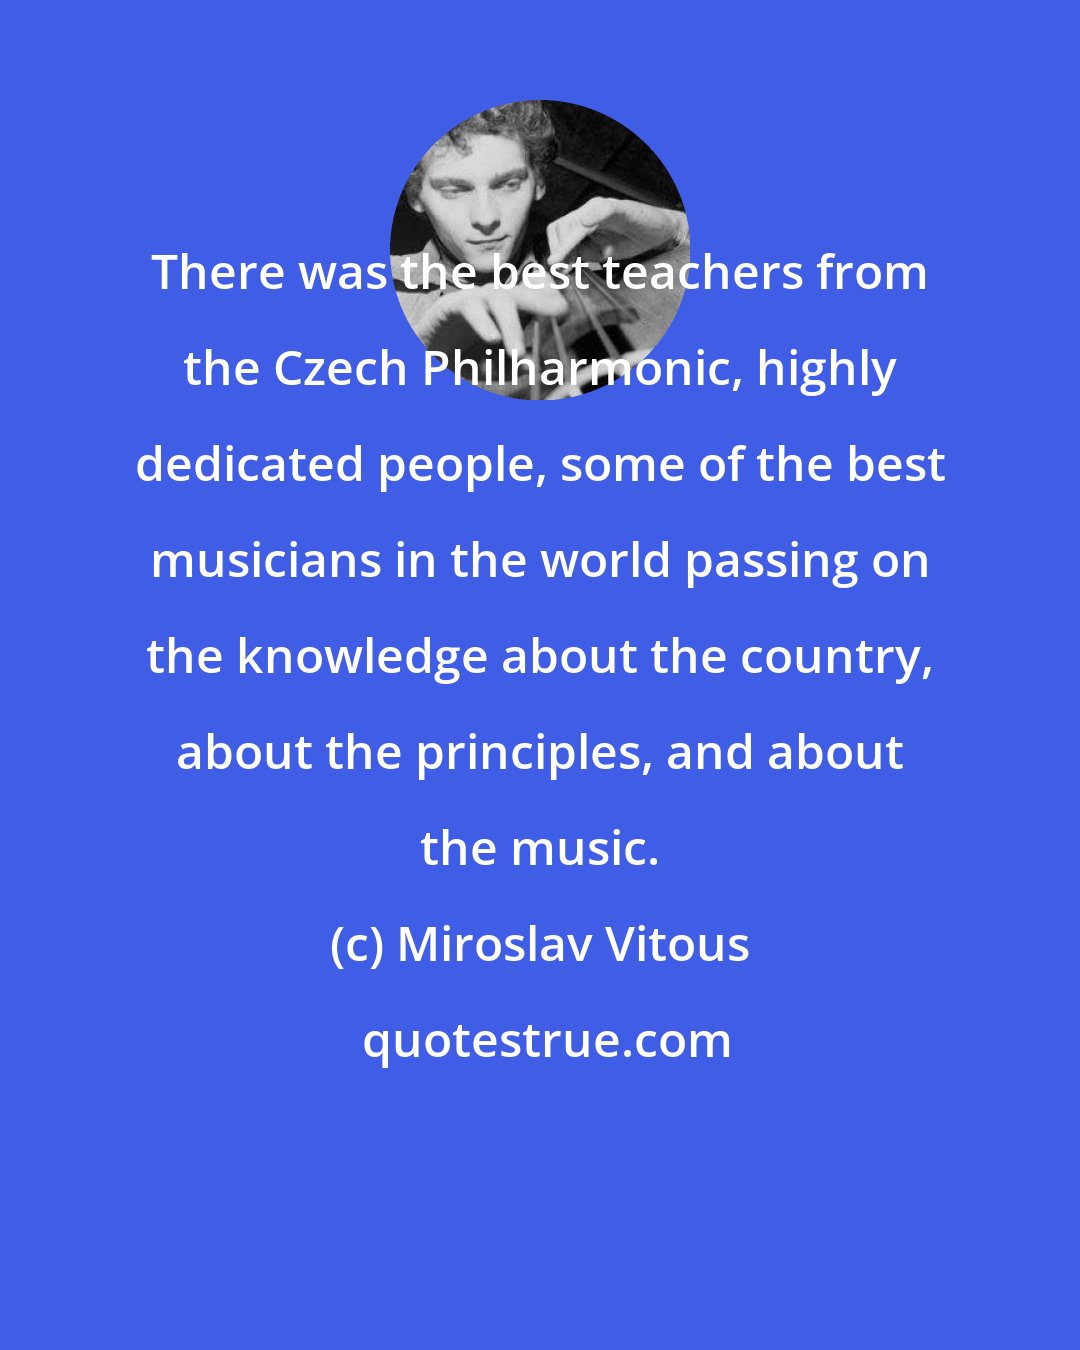 Miroslav Vitous: There was the best teachers from the Czech Philharmonic, highly dedicated people, some of the best musicians in the world passing on the knowledge about the country, about the principles, and about the music.